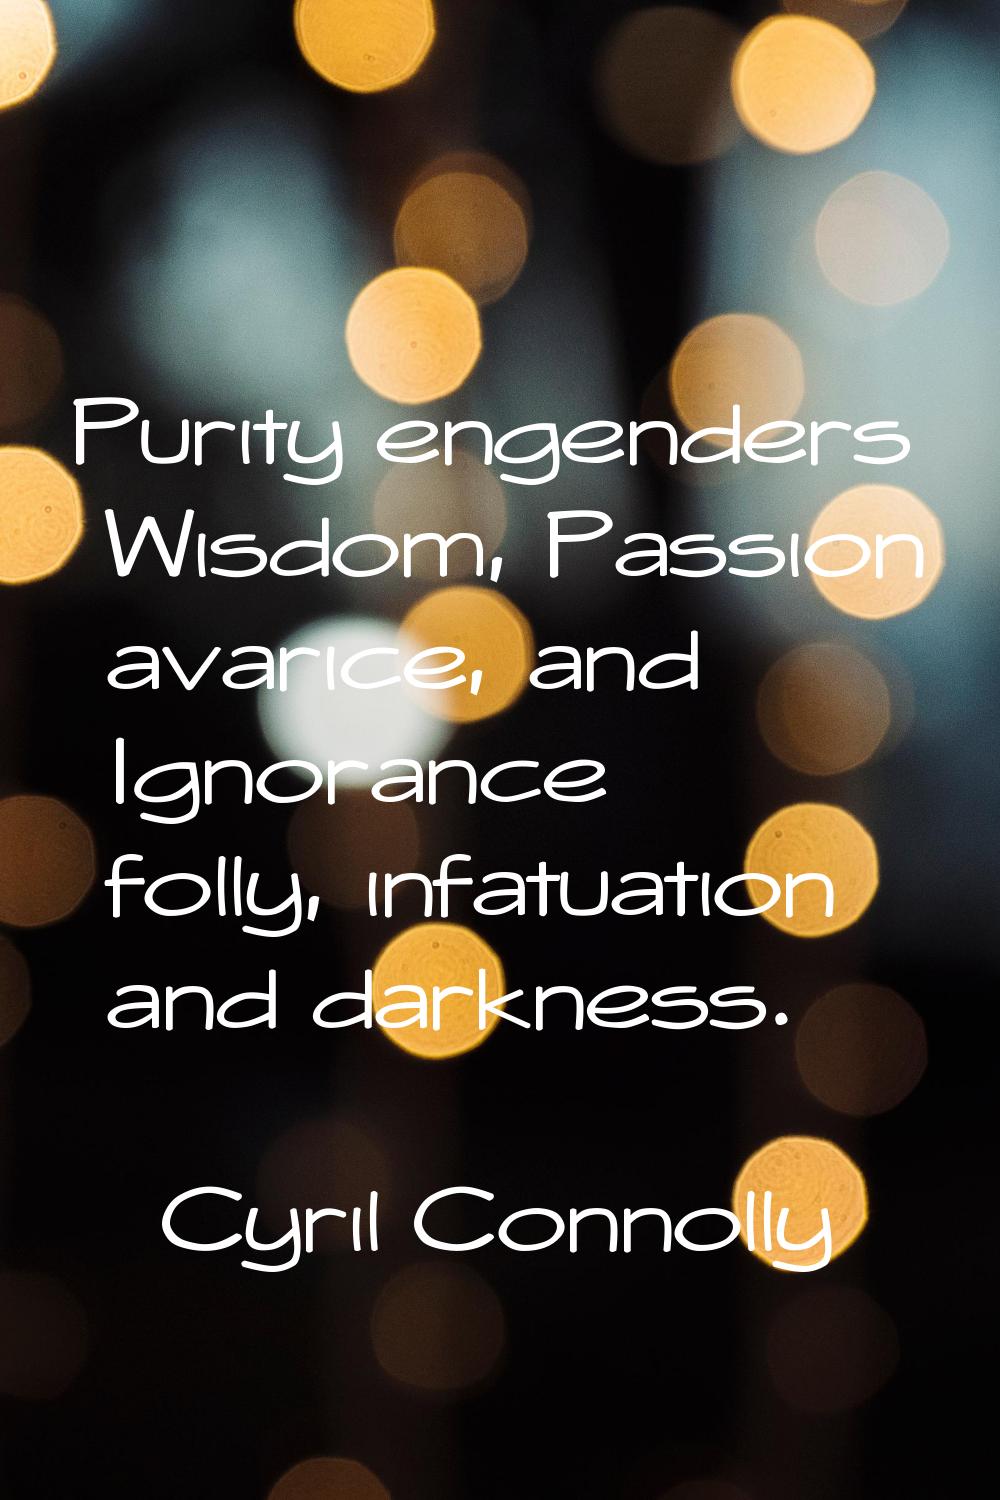 Purity engenders Wisdom, Passion avarice, and Ignorance folly, infatuation and darkness.